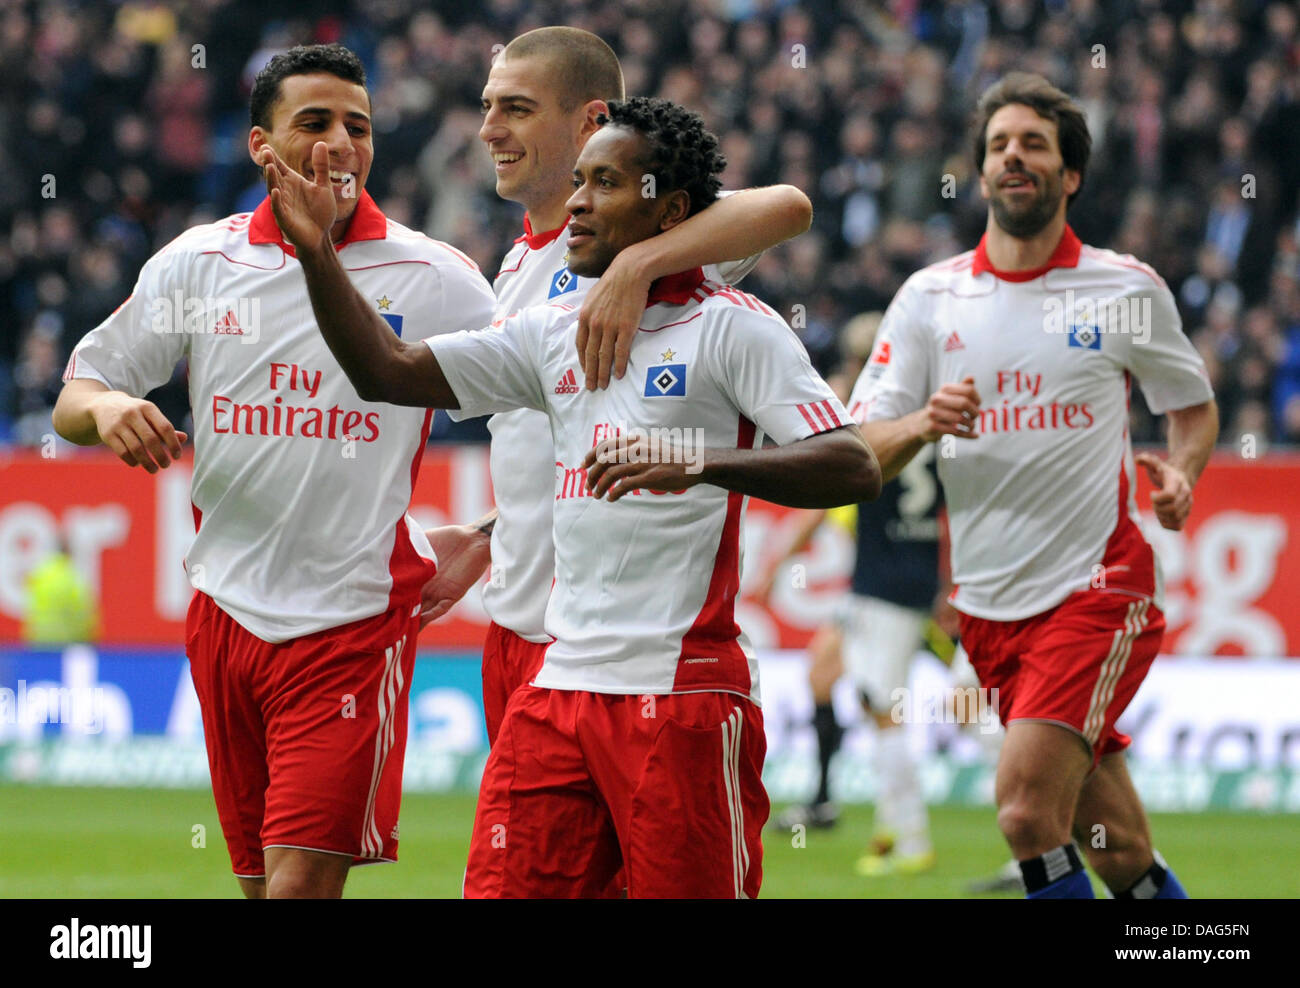 Hamburg's Aenis Ben-Hatira (l-r), Mladen Petric, goal scorer Ze Roberto, and Ruud van Nistelrooy cheer with teammates after the 6-1 goal during a German Bundesliga match of Hamburger SV versus 1. FC Cologne in Hamburg, Germany, 19 March 2011. Photo: Angelika Warmuth Stock Photo